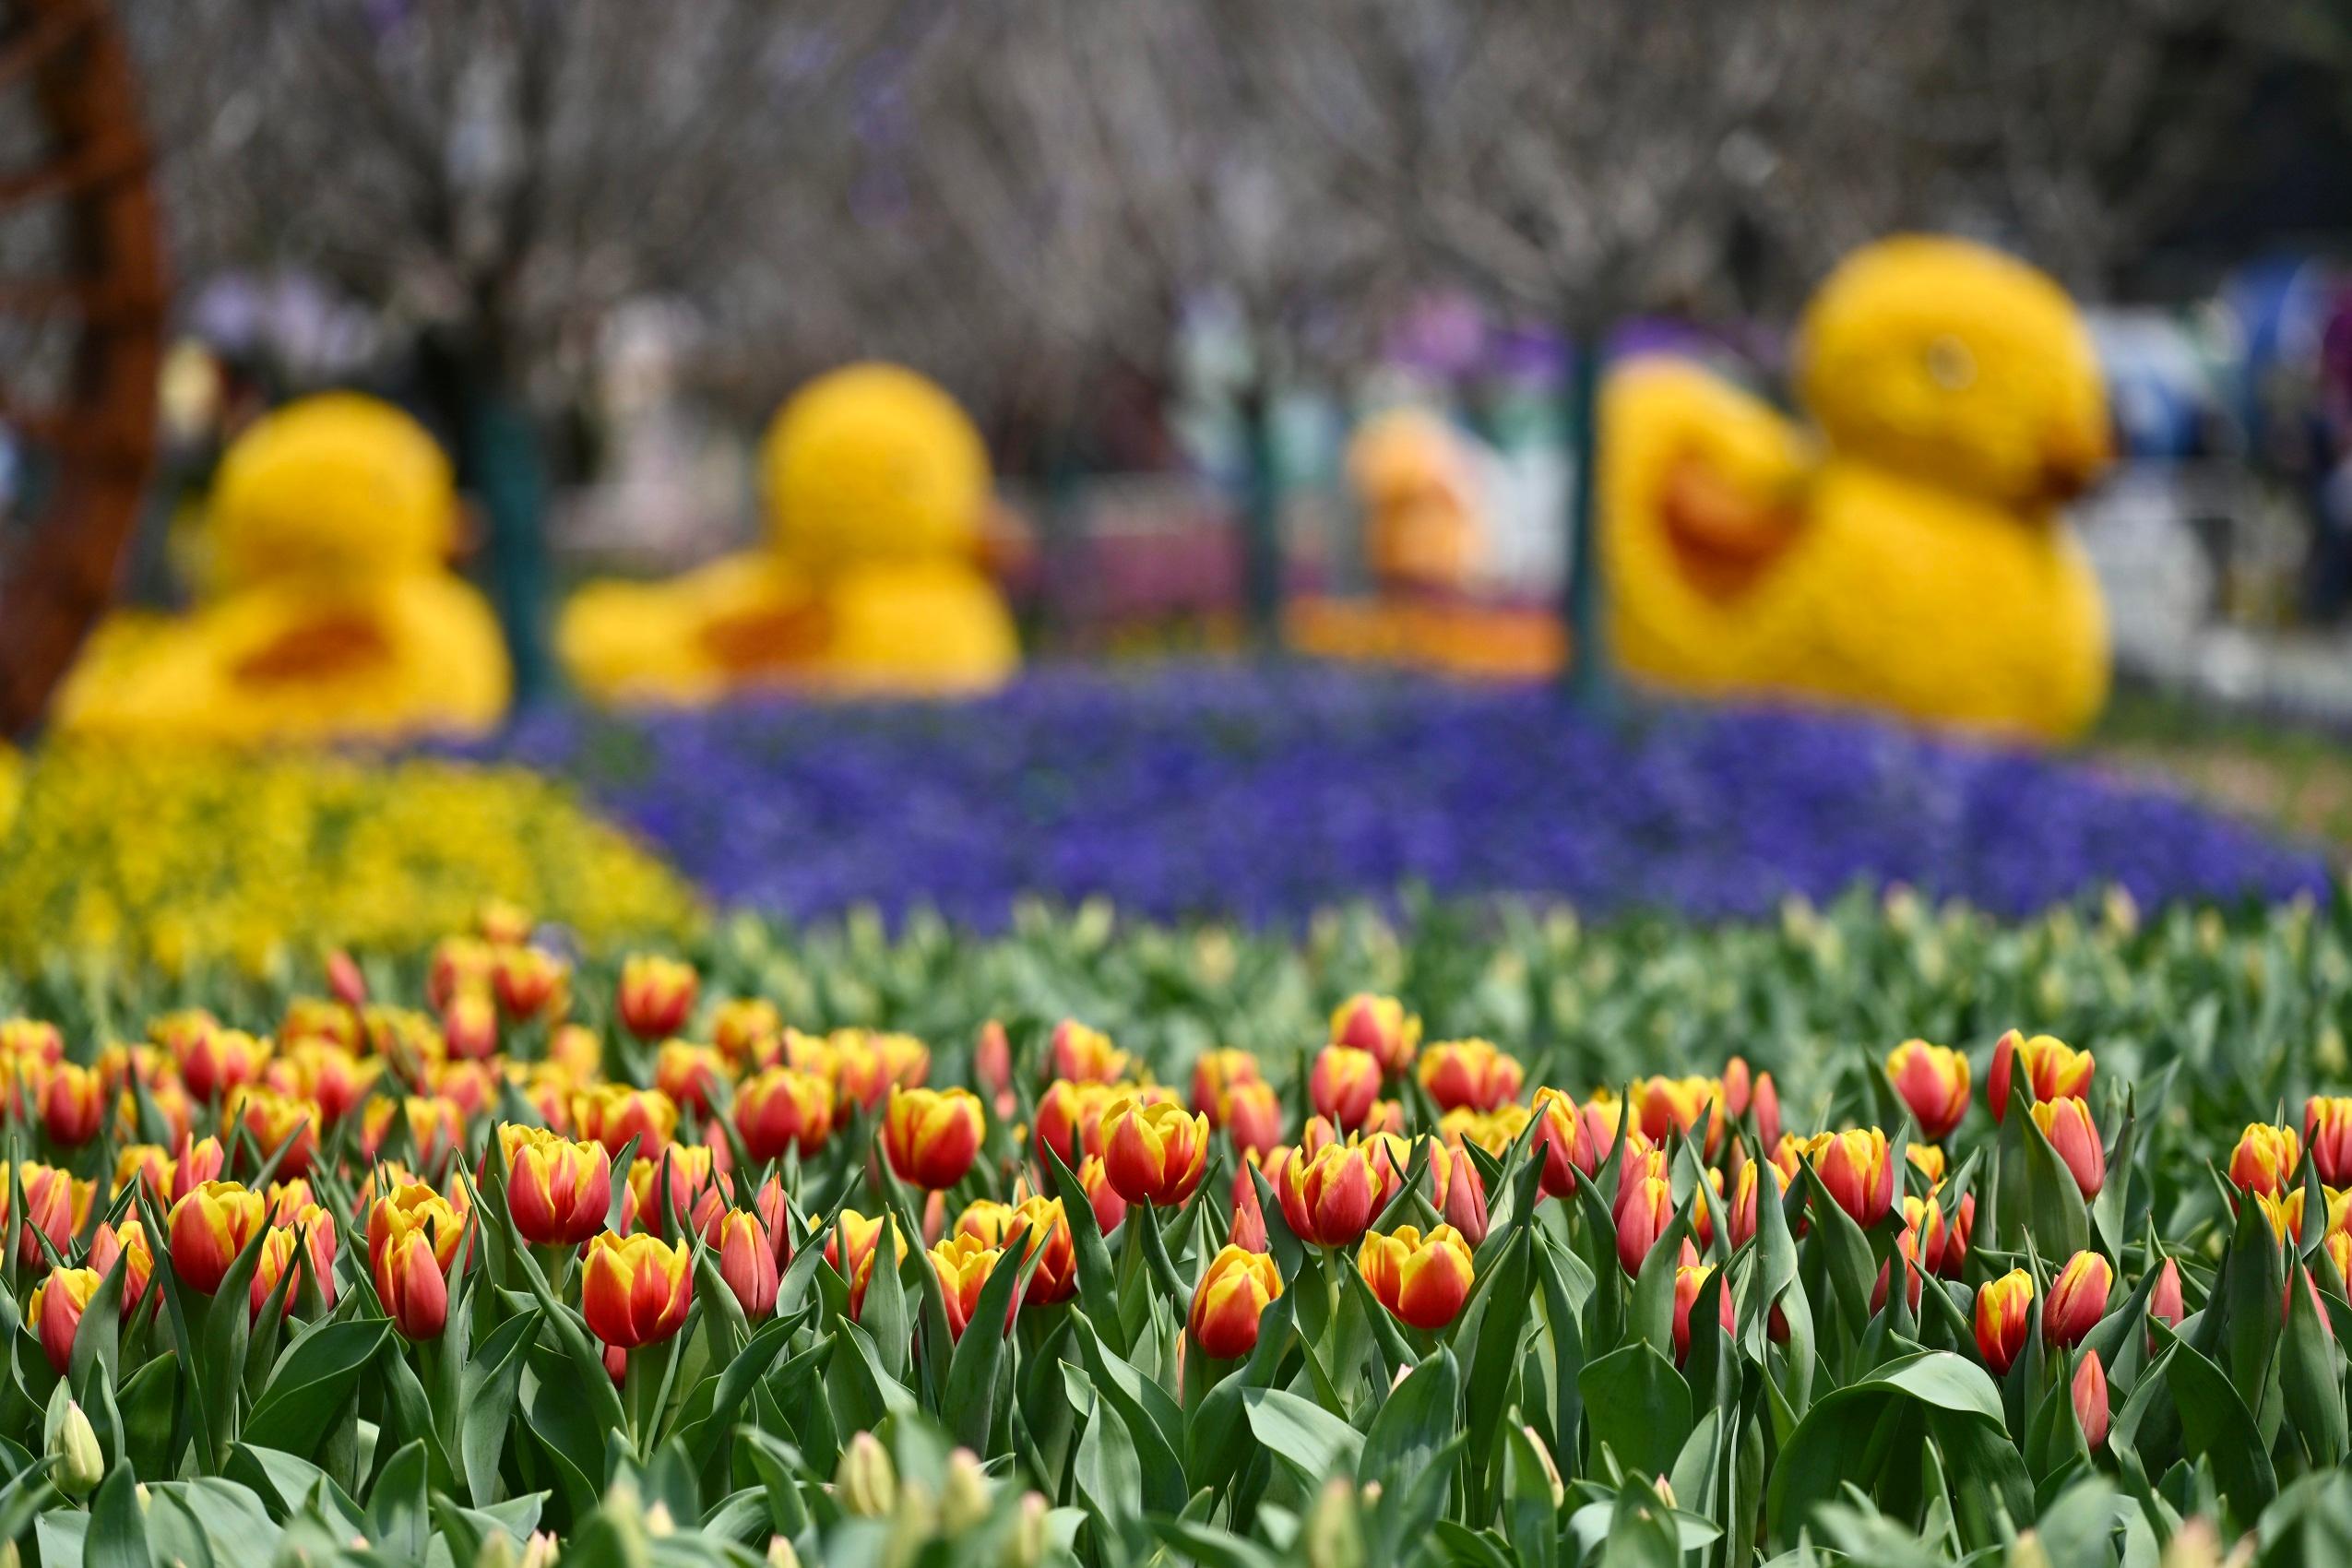 The Hong Kong Flower Show 2023 will be held at Victoria Park from tomorrow (March 10) until March 19. This year's flower show features "Bliss in Bloom" as the main theme and hydrangea as the theme flower. Photo shows the well-received sea of tulips, which will continue to be a hot spot for photo-taking.